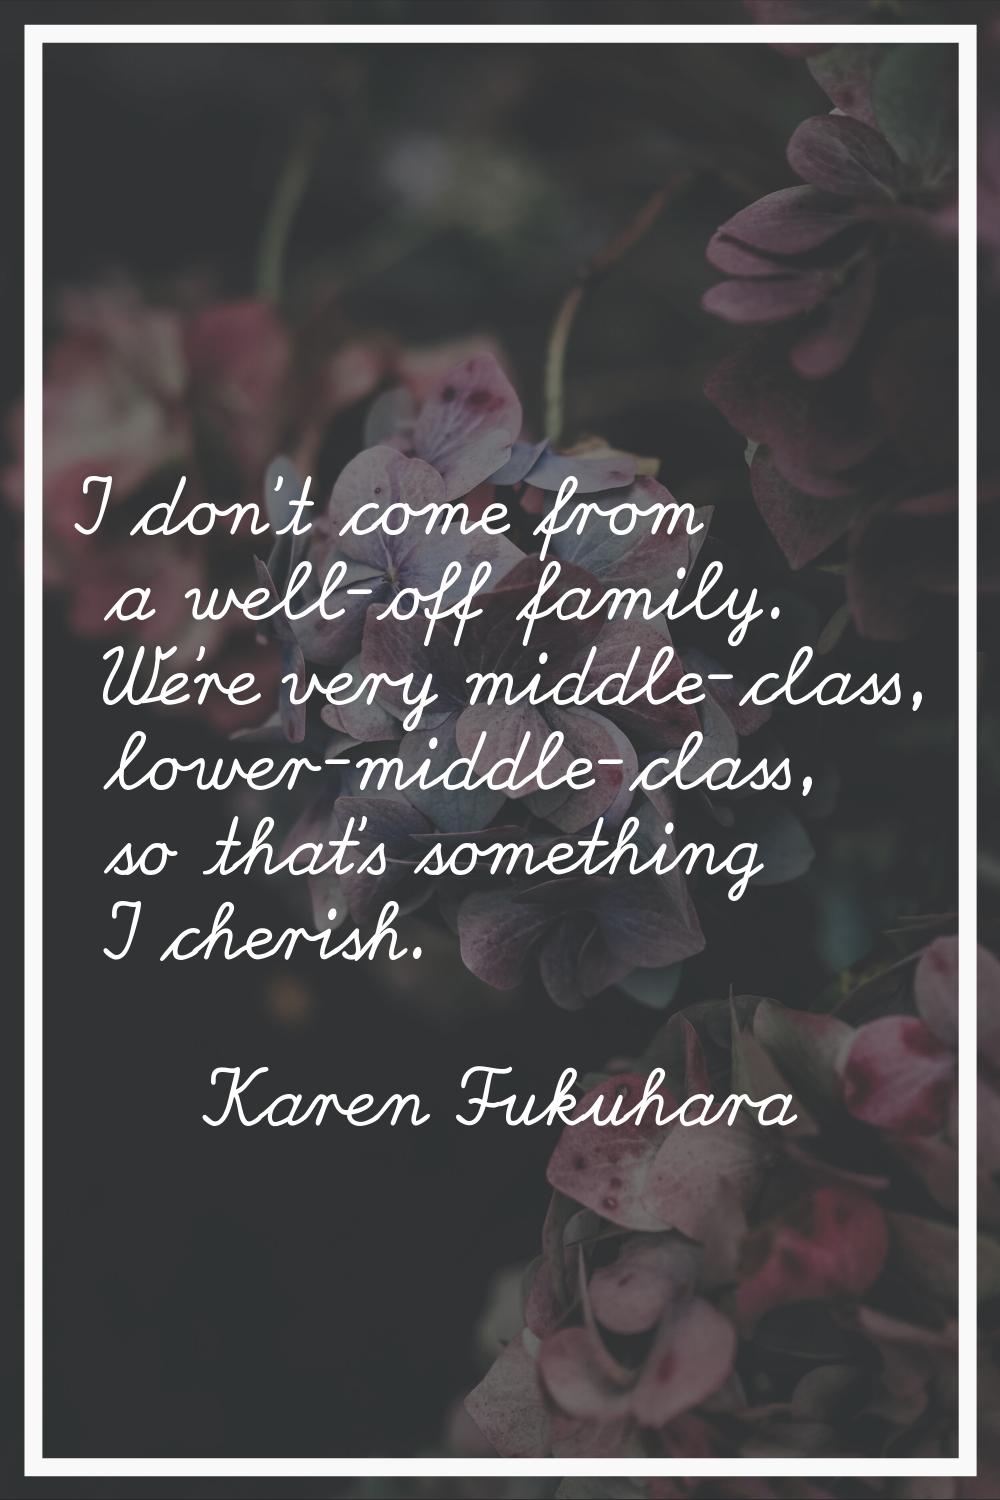 I don't come from a well-off family. We're very middle-class, lower-middle-class, so that's somethi